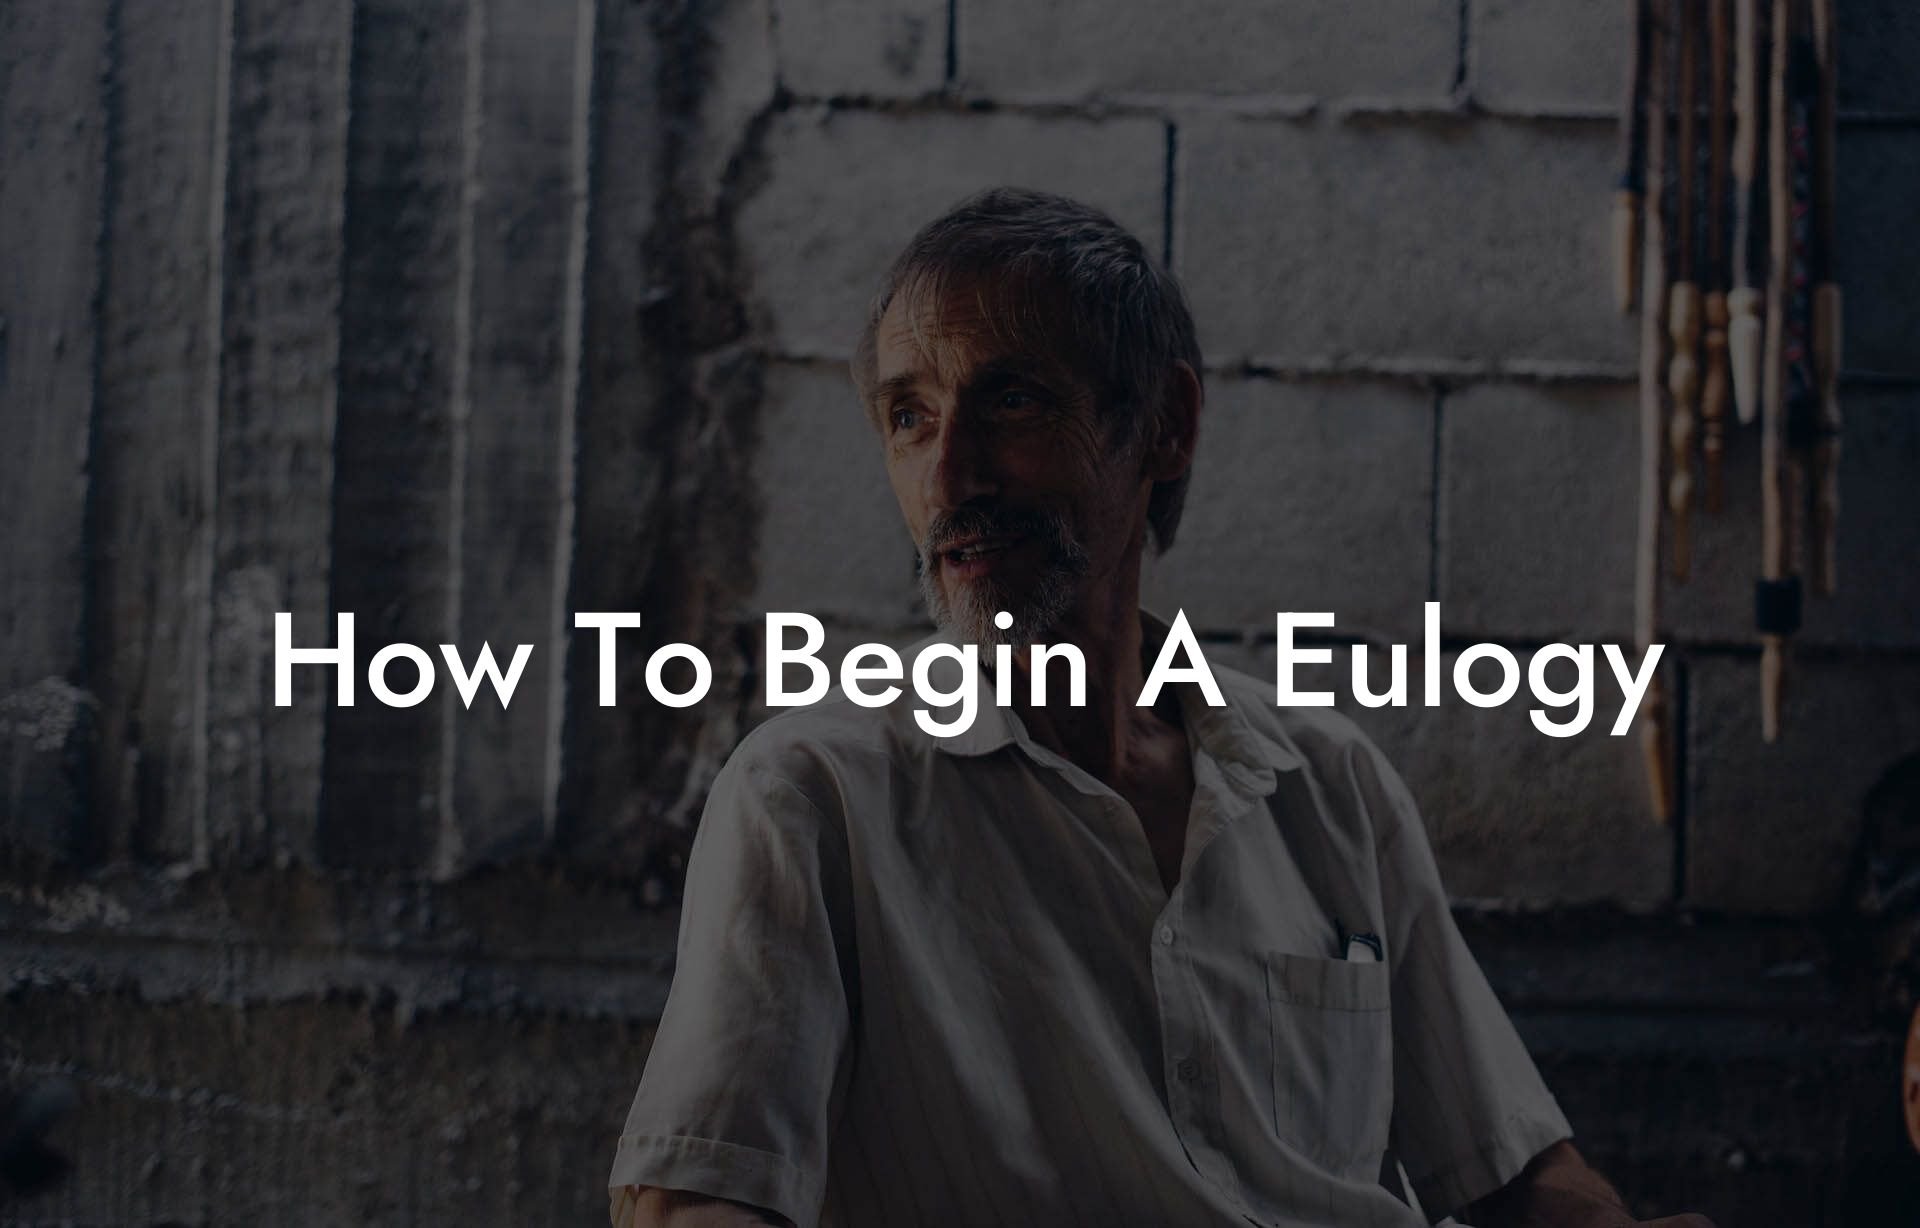 How To Begin A Eulogy